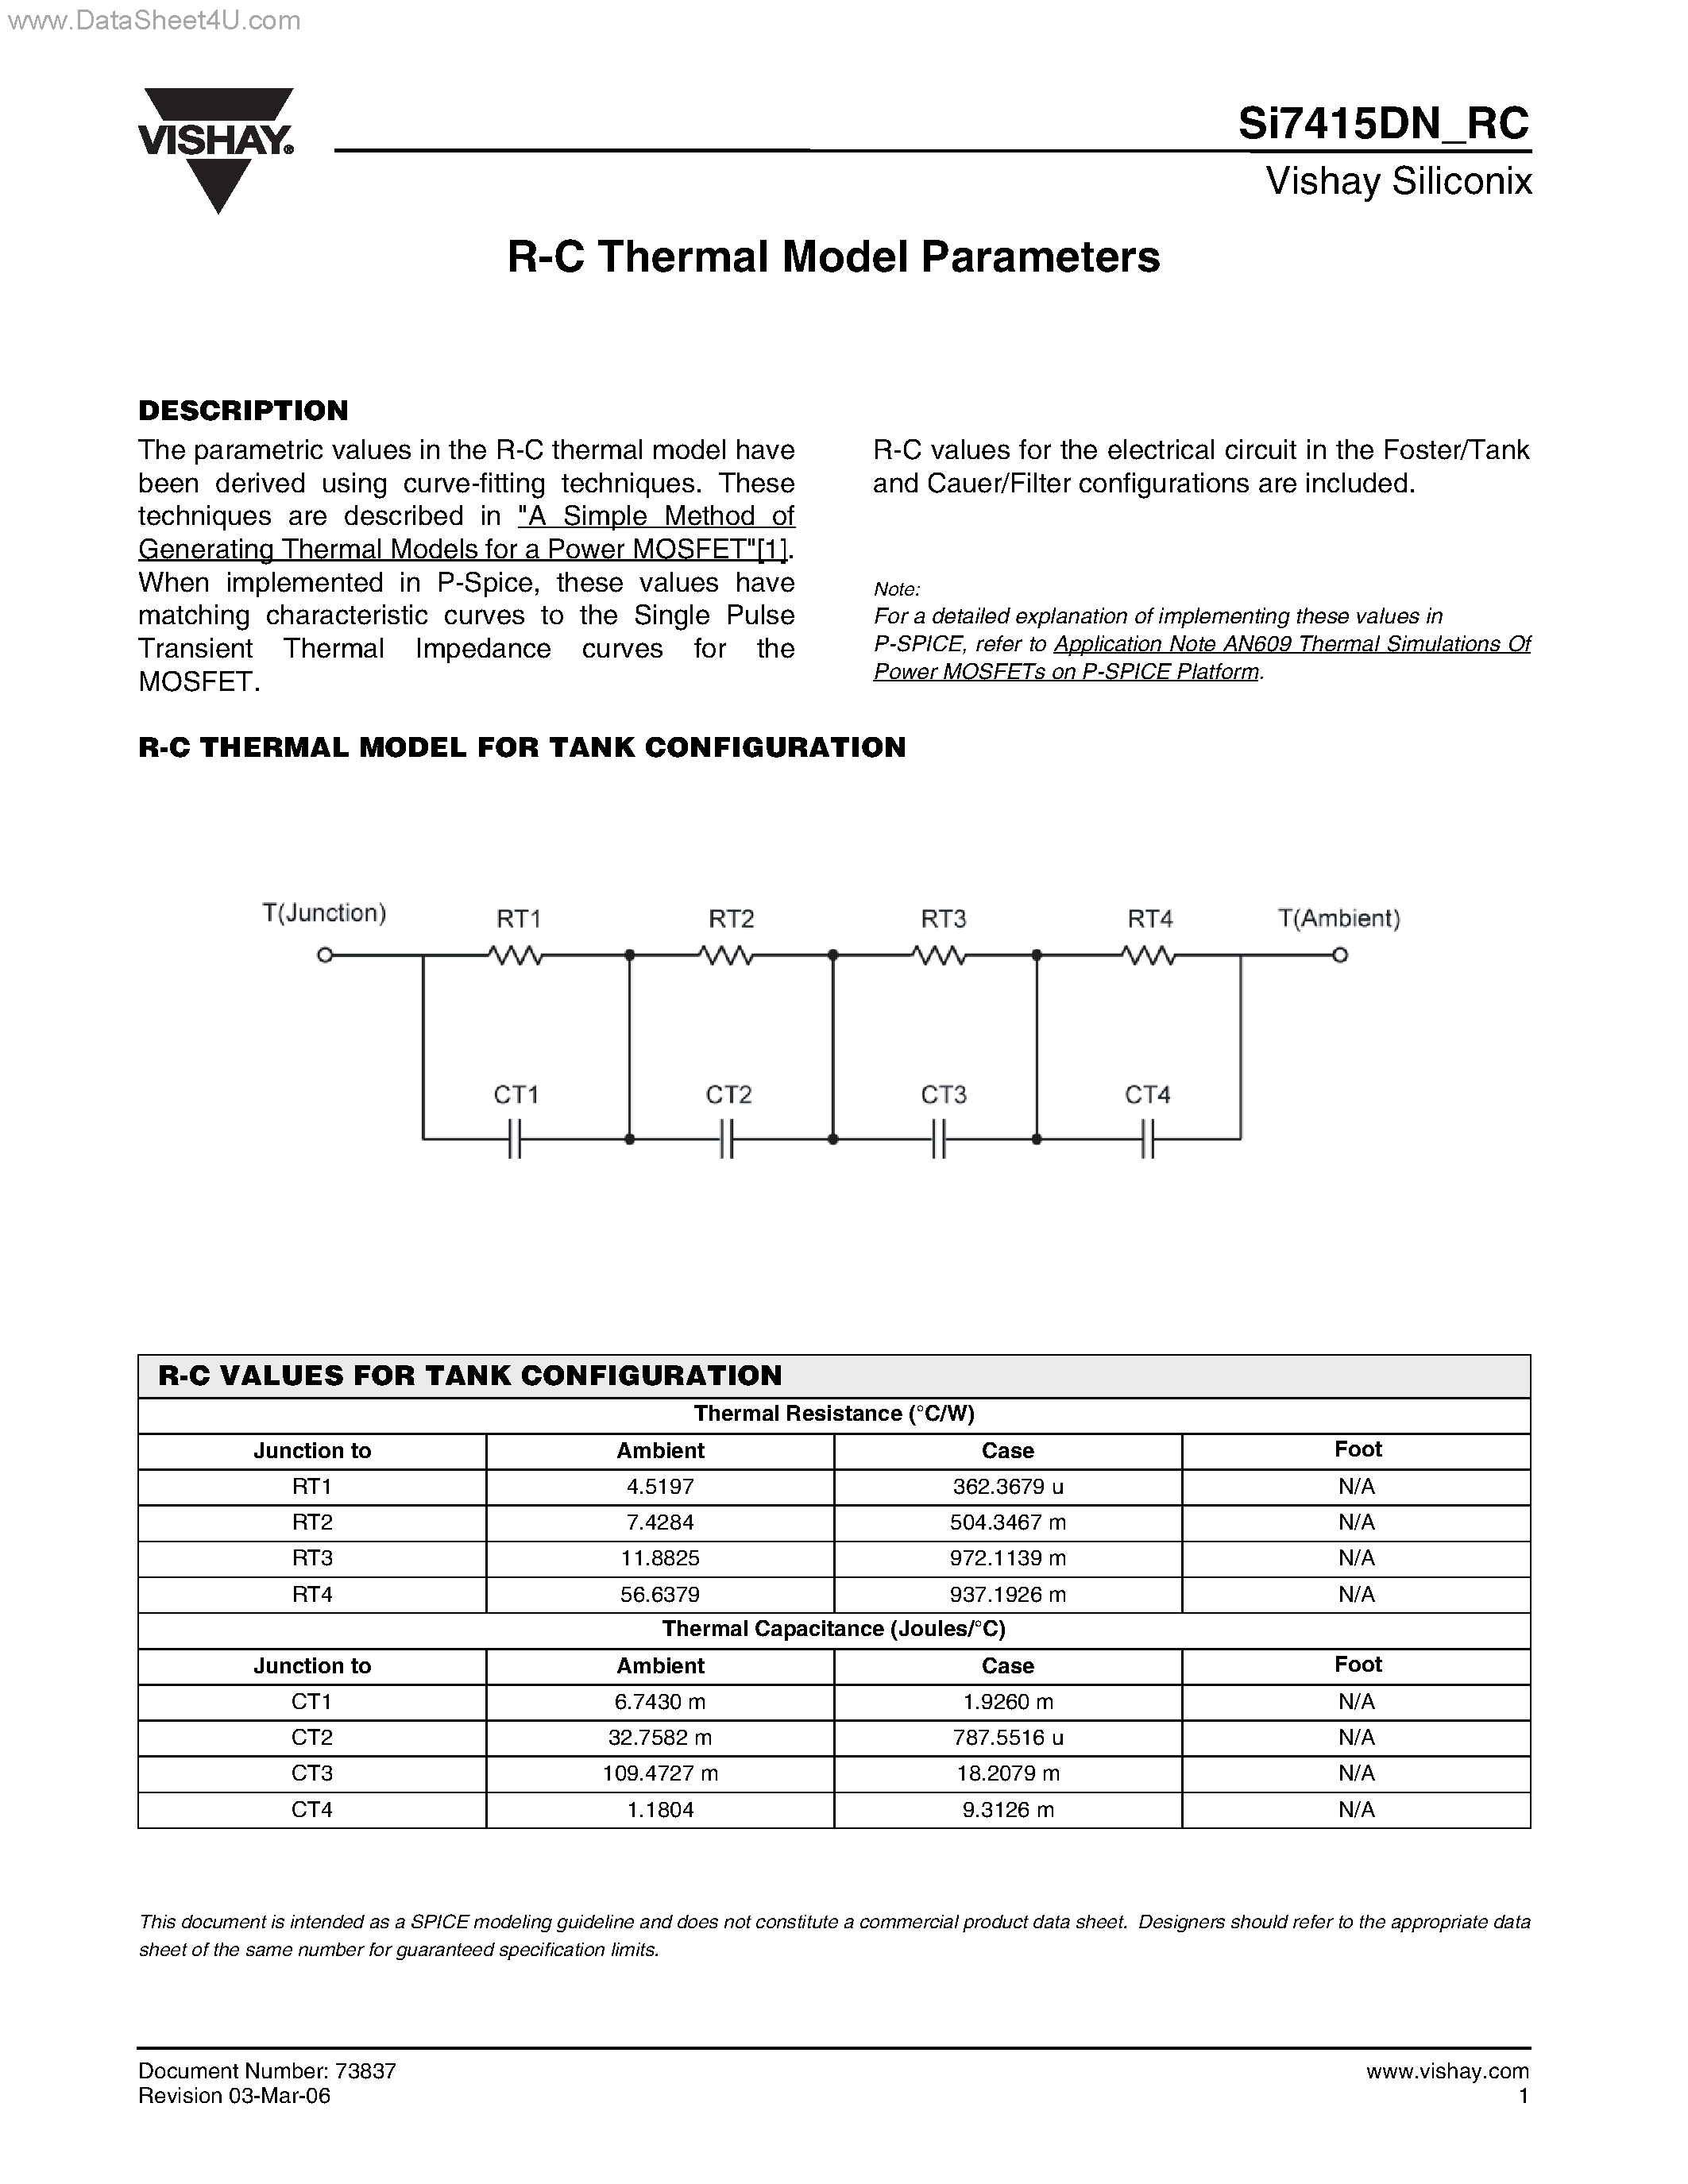 Datasheet SI7415DN-RC - R-C Thermal Model Parameters page 1